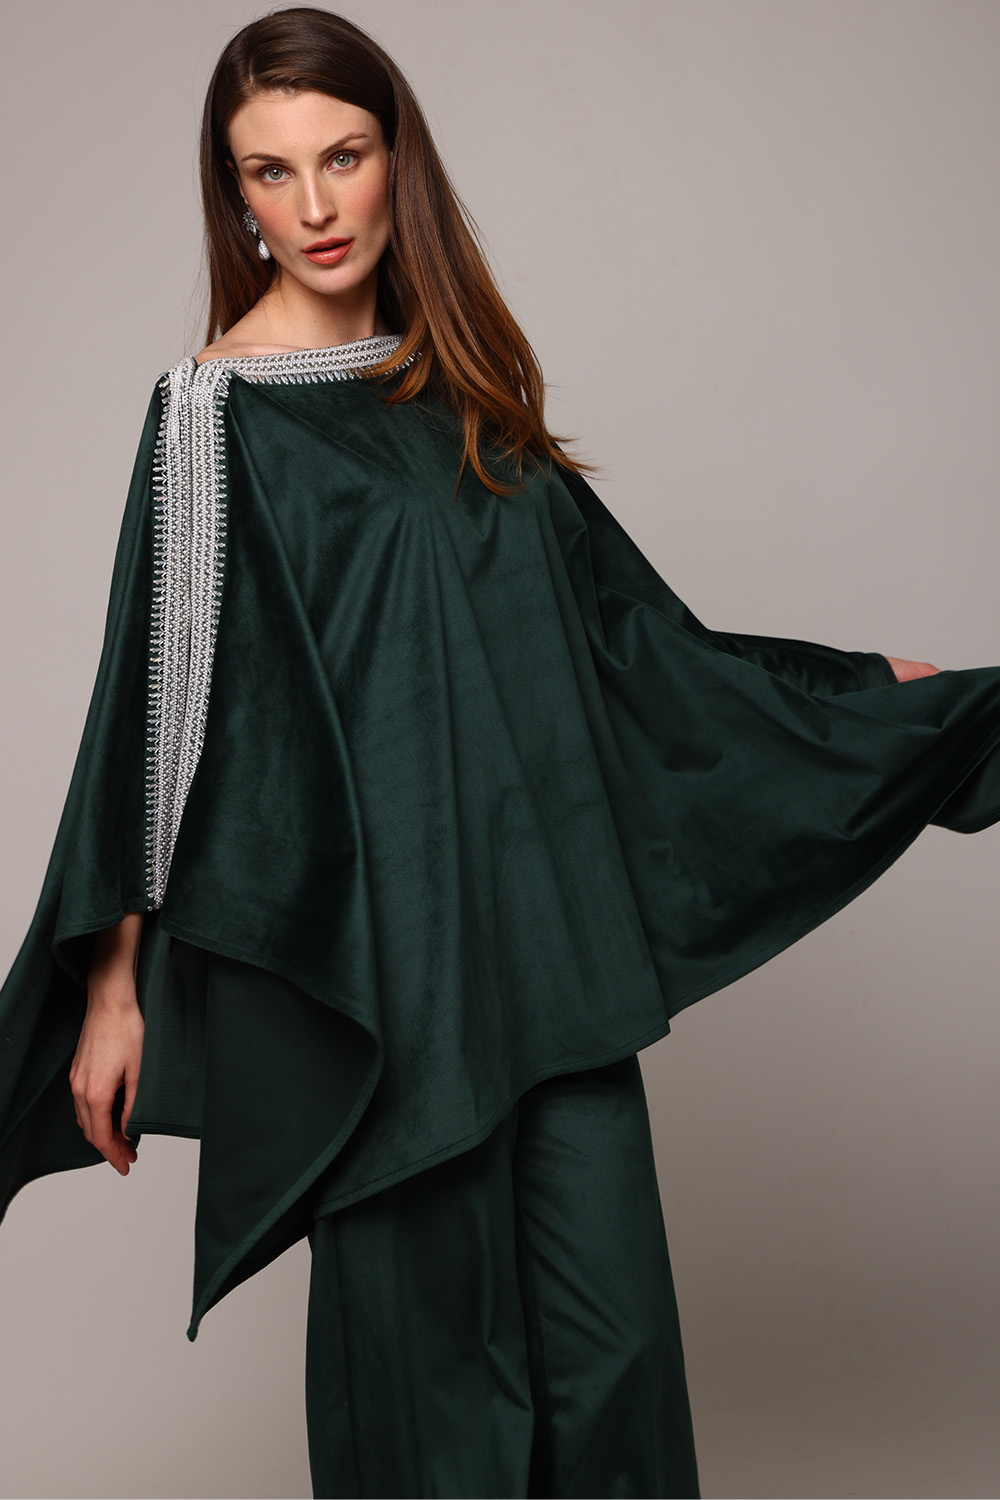 Multifaceted Bottle Green Cape